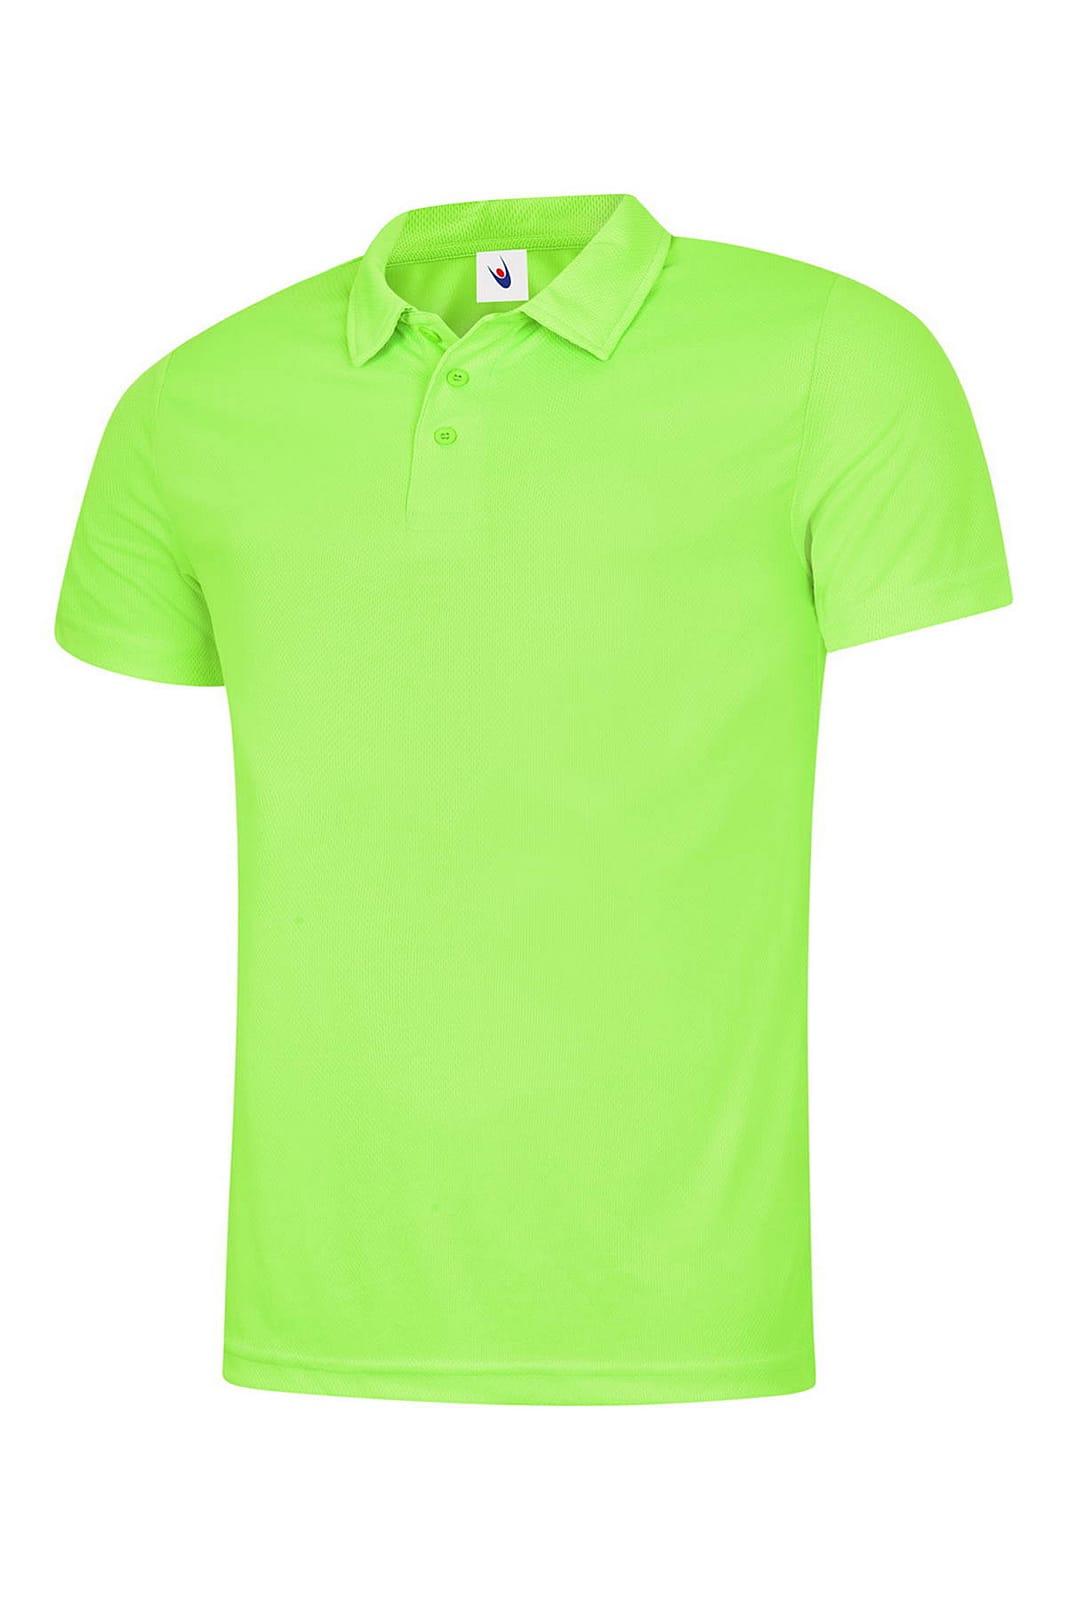 Uneek UC125 Mens Ultra Cool Polo Shirt Lightweight Polyester Breathable Sports 